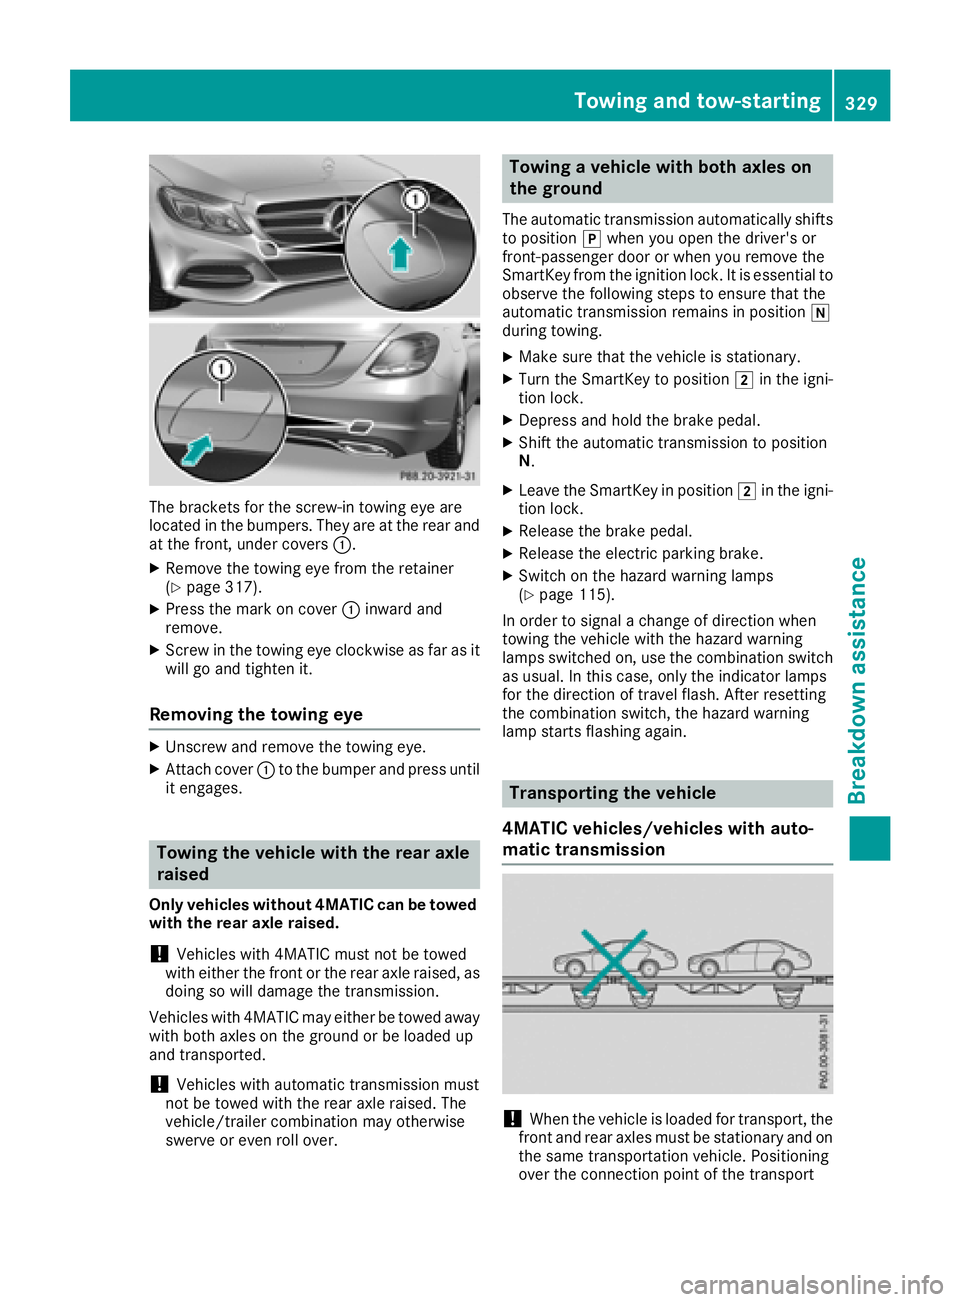 MERCEDES-BENZ C CLASS 2018 Manual PDF The brackets for the screw-in towing eye are
located in the bumpers. They are at the rear and
at the front, under covers:.
XRemove the towing eye from the retainer
(Ypage 317).
XPress the mark on cove